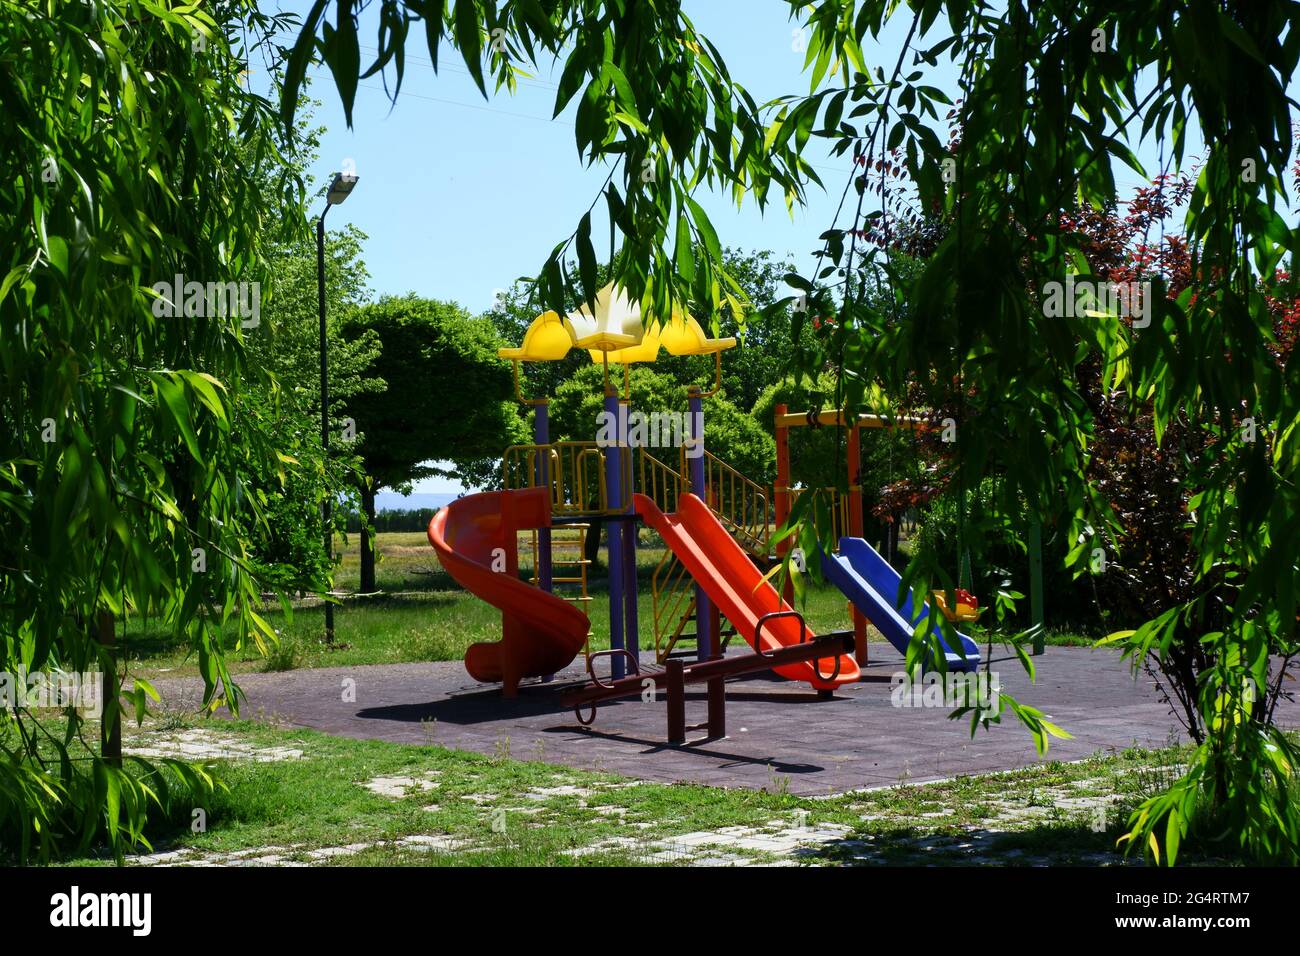 Kids' Playground outdoor within trees in a sunny day Stock Photo